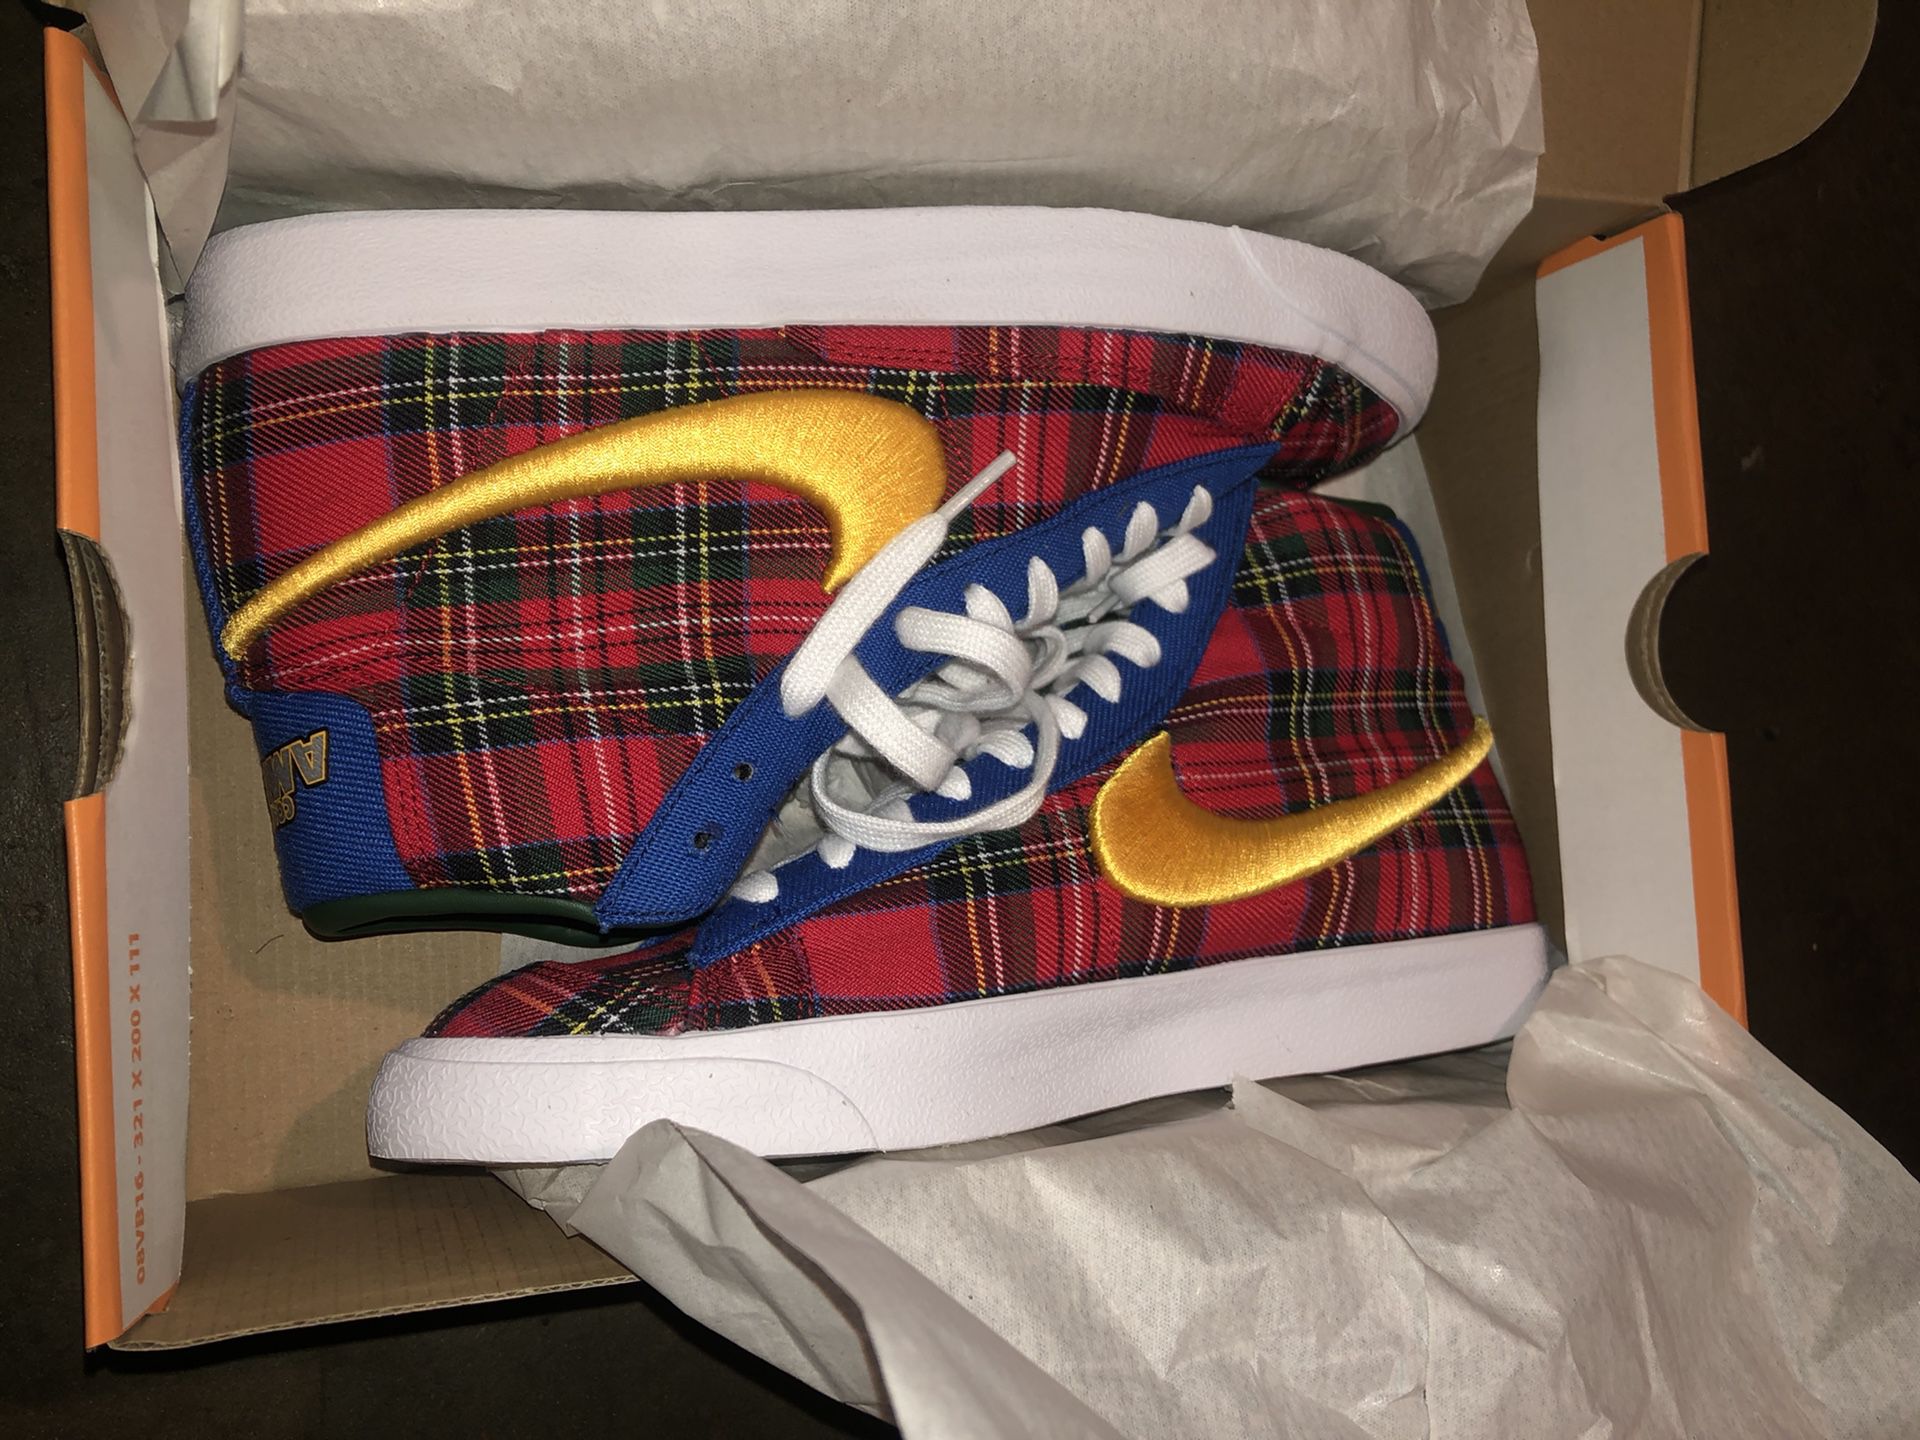 Nike Blazer “Coming To America” DS 8.5